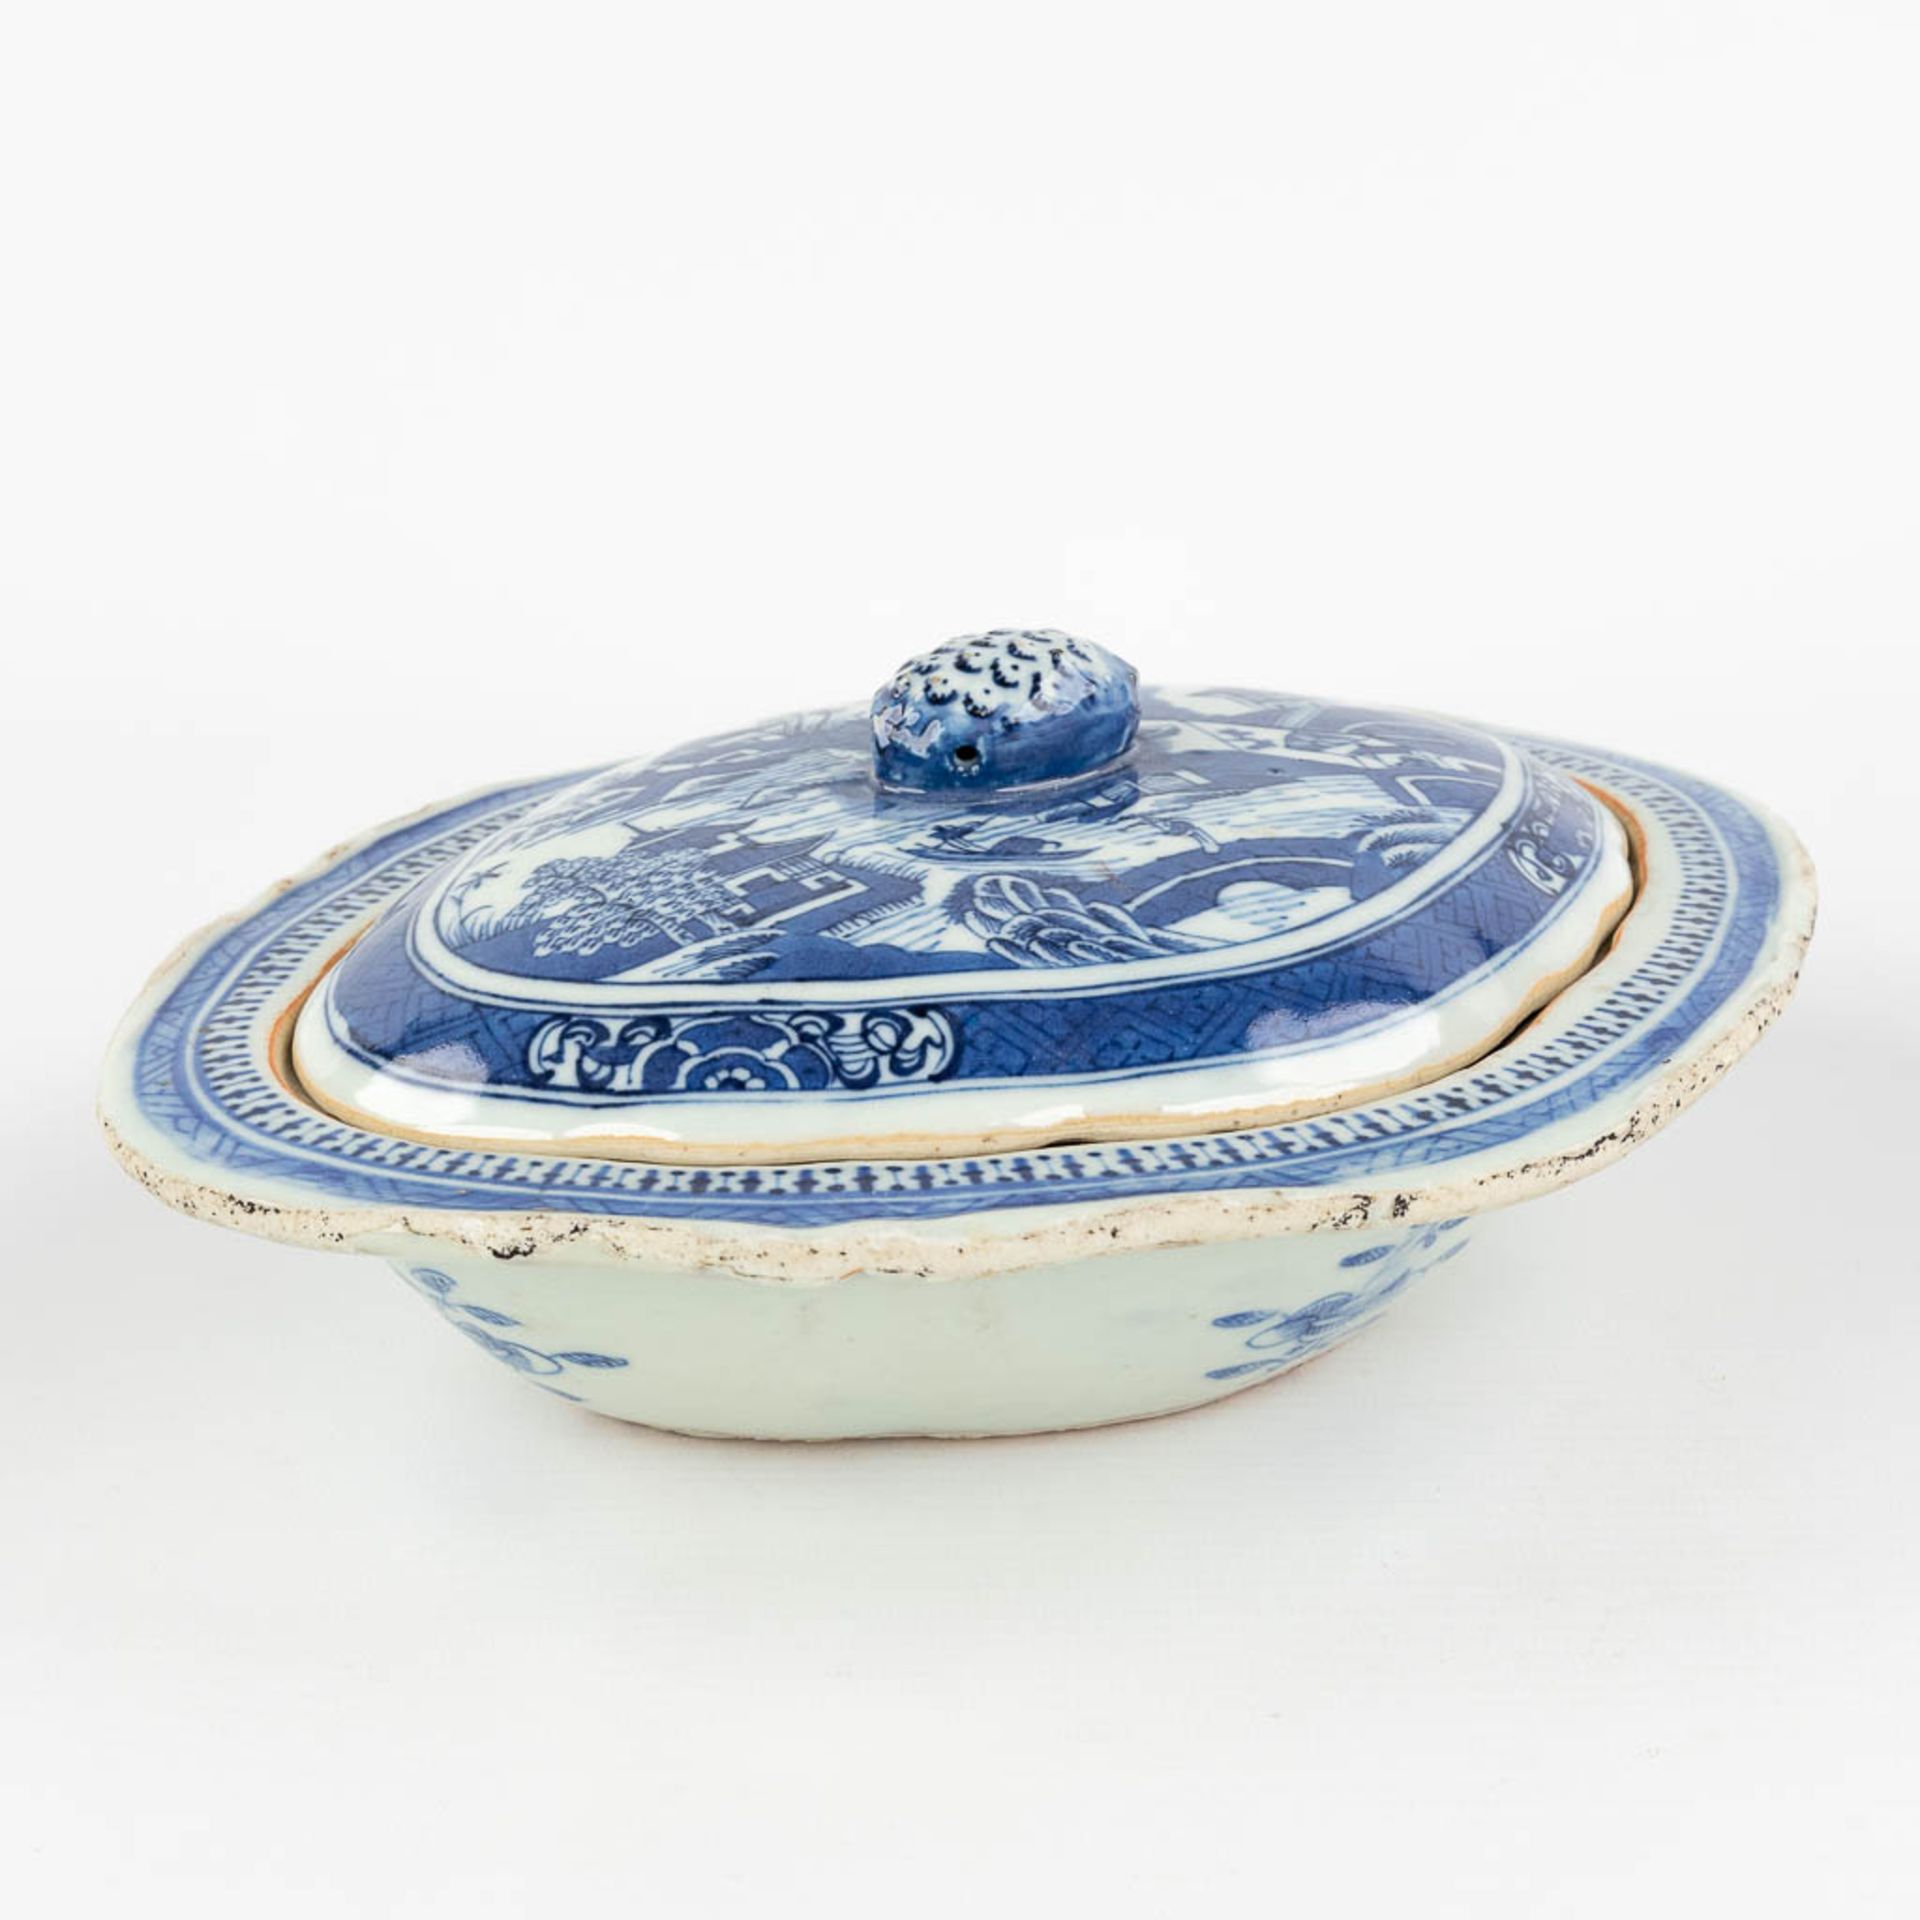 A Chinese bowl with a lid and blue-white landscape decor. 19th C. (L: 21,5 x W: 26,5 x H: 10 cm) - Image 3 of 15